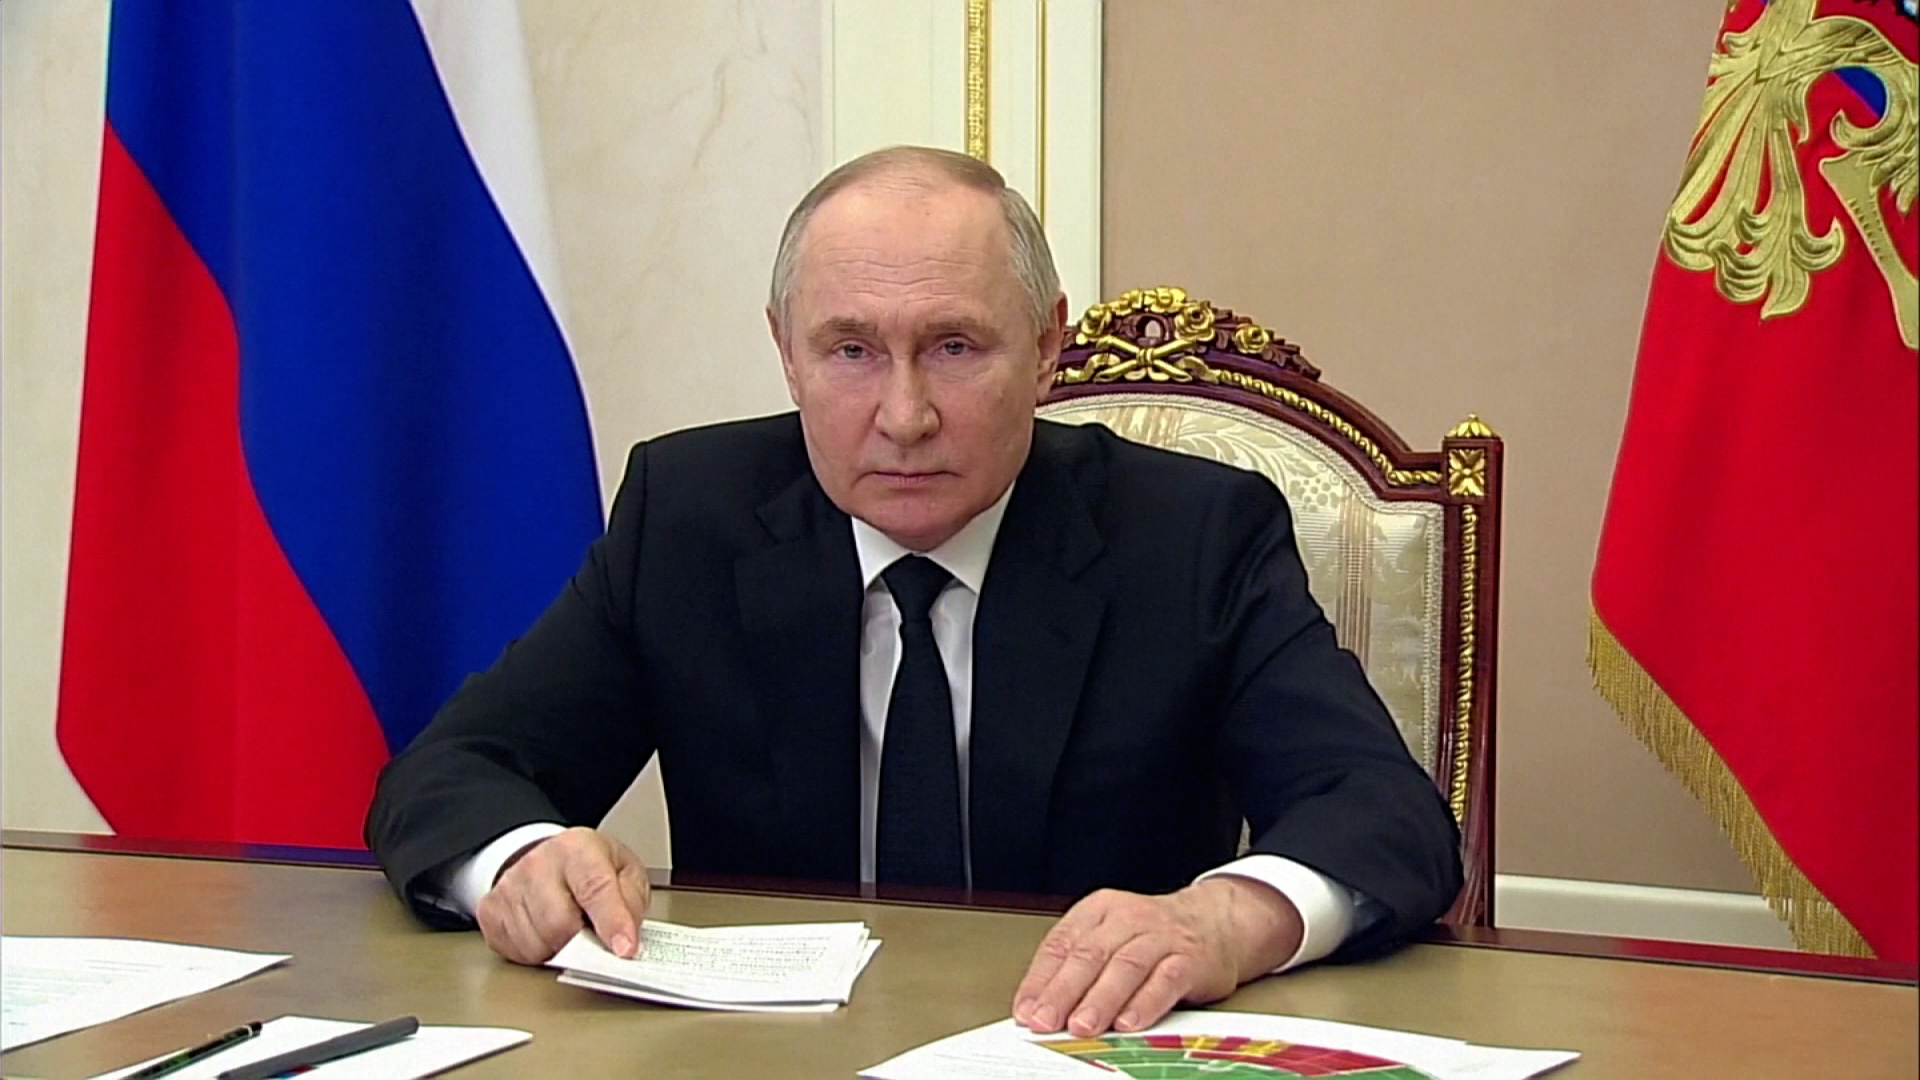 Russian President Vladimir Putin delivers a statement on Monday.